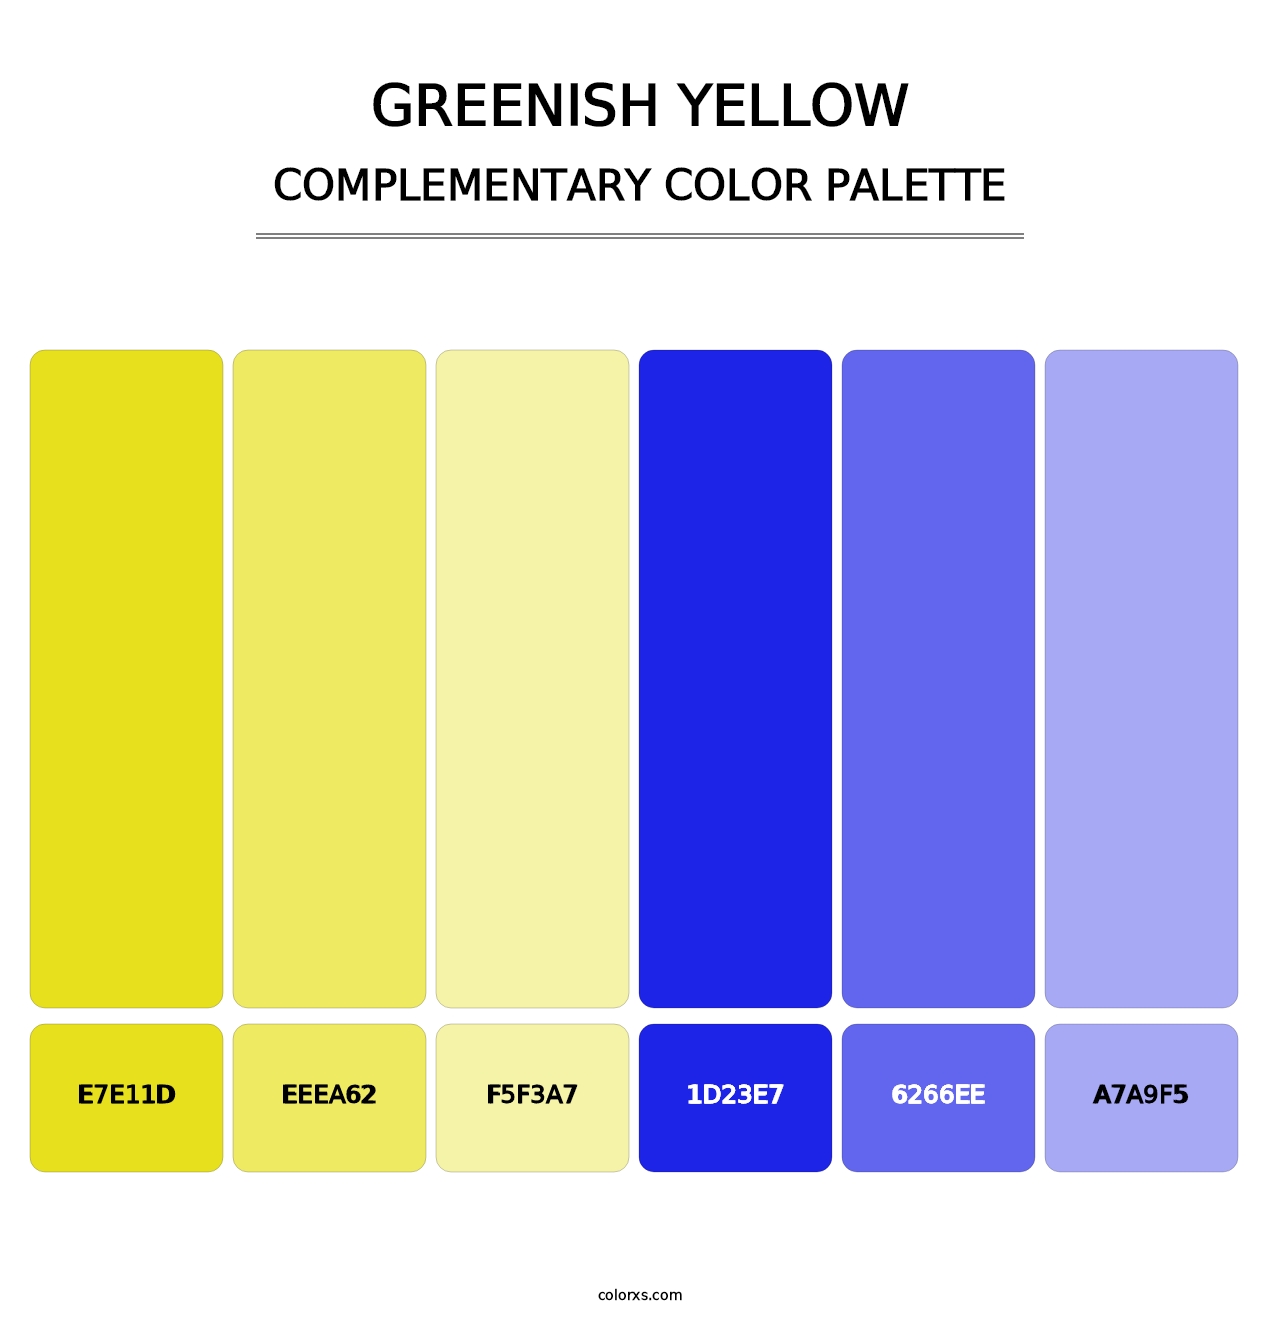 Greenish Yellow - Complementary Color Palette